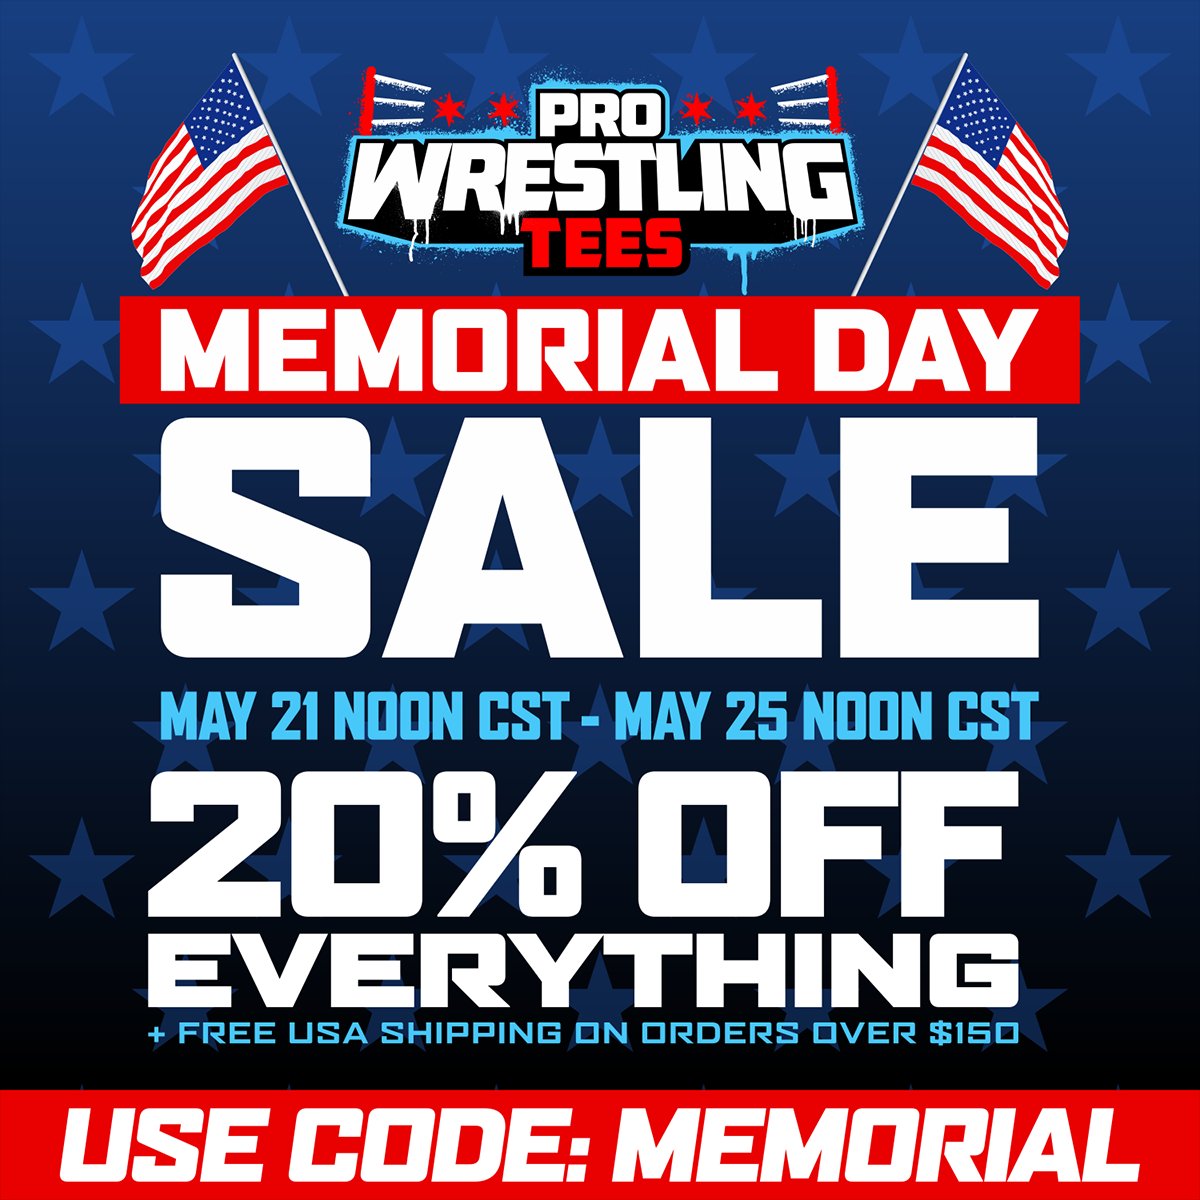 CBPW is ONLY 7 shirt sales away from our 100th shirt sale! You can get 20% still today by going to prowrestlingtees.com/crossbodyprowr… and using the code 'MEMORIAL' to get 20% off! Whoever makes the 100th purchase is getting a special gift! Thank you all so much for supporting our crew!